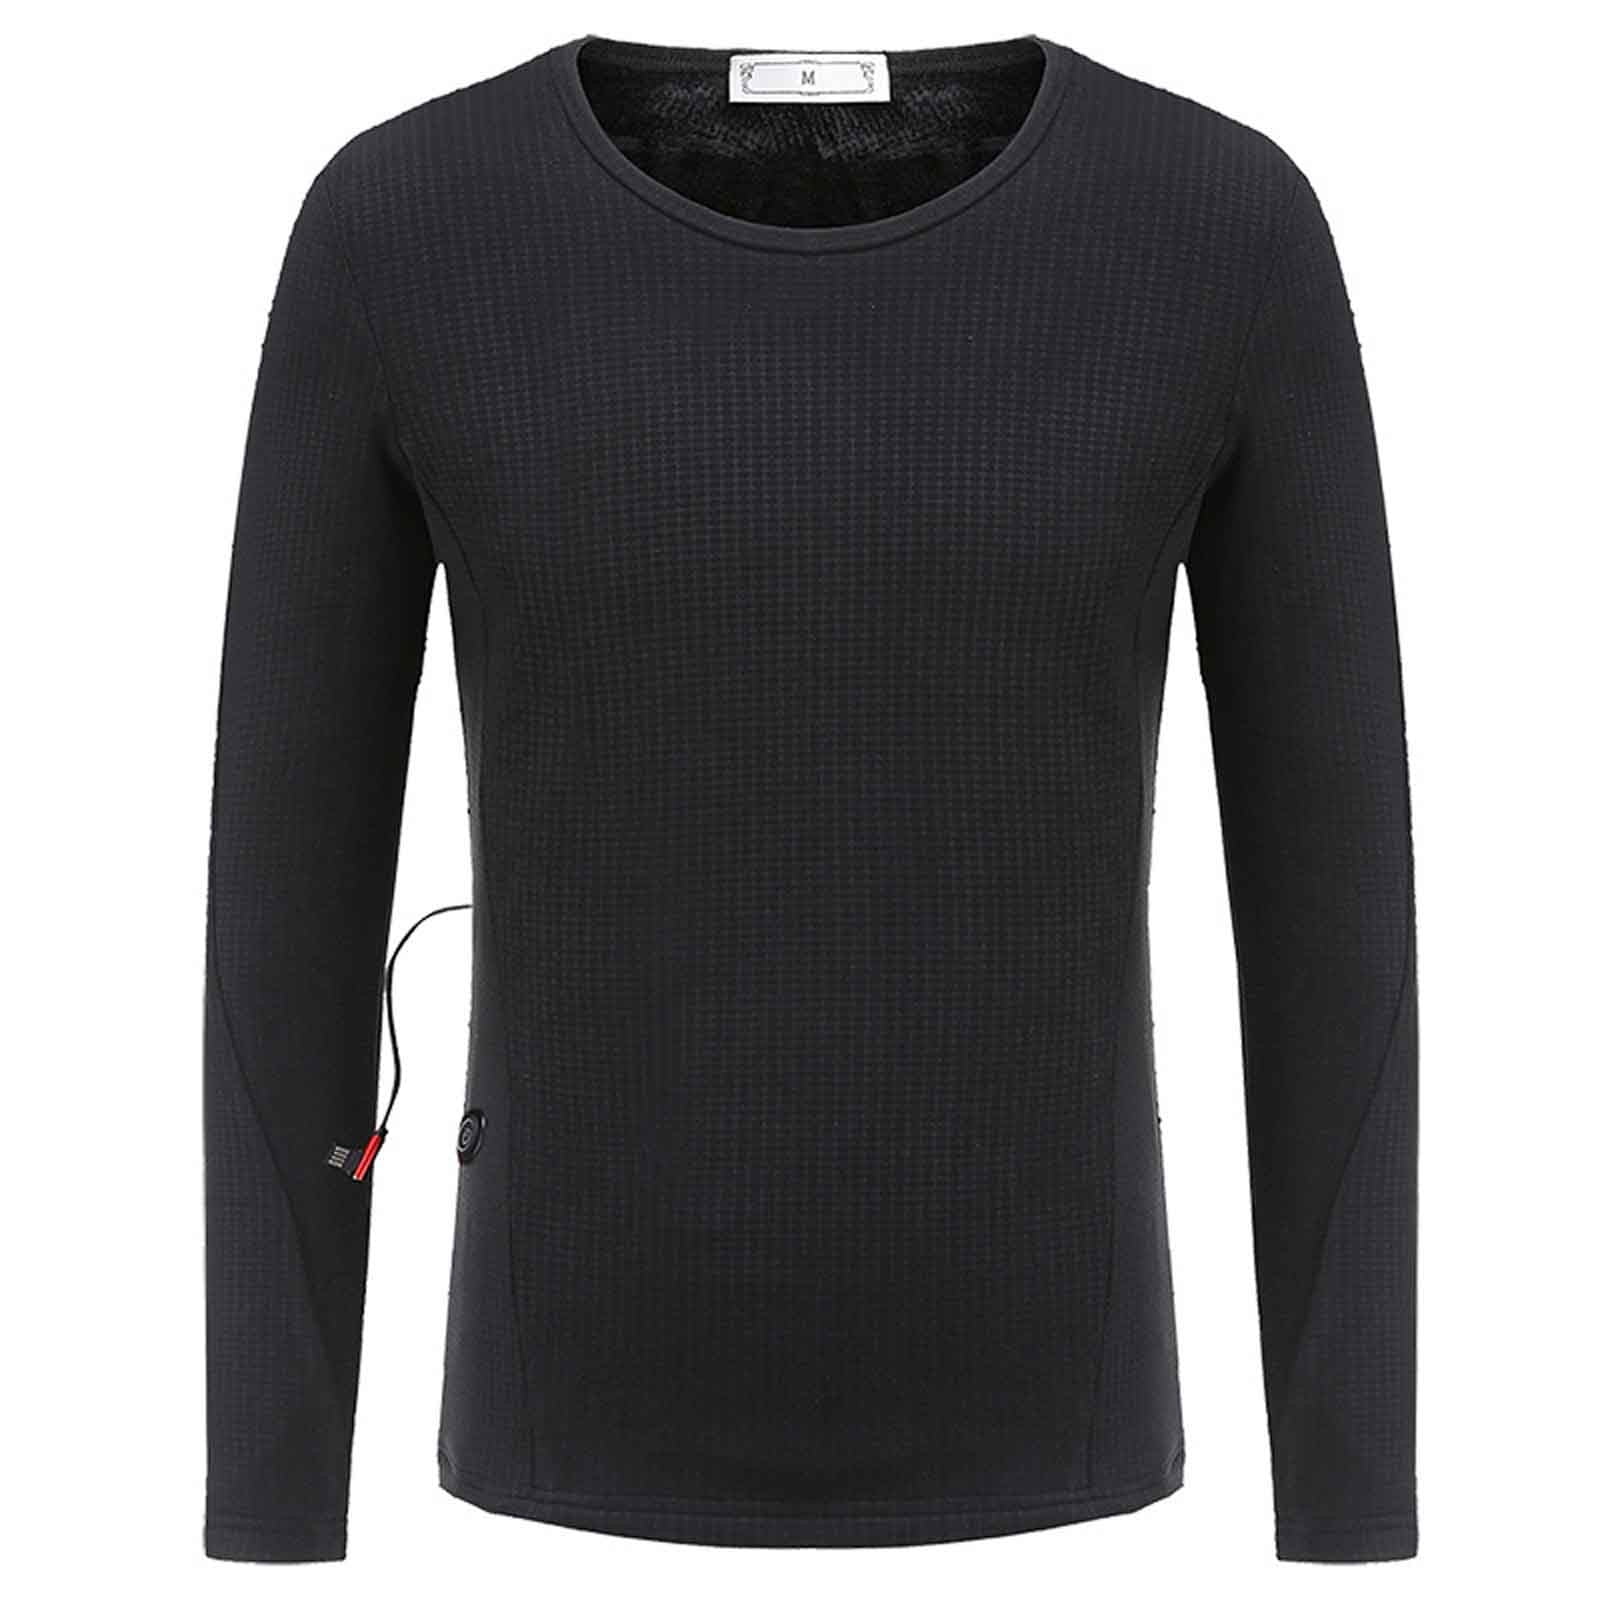 Heated Thermal Tops for Men Women Sleeves Underwear Fleece Lined Electric Heating Shirts for Cold Weather Washable Base Layer - Walmart.com